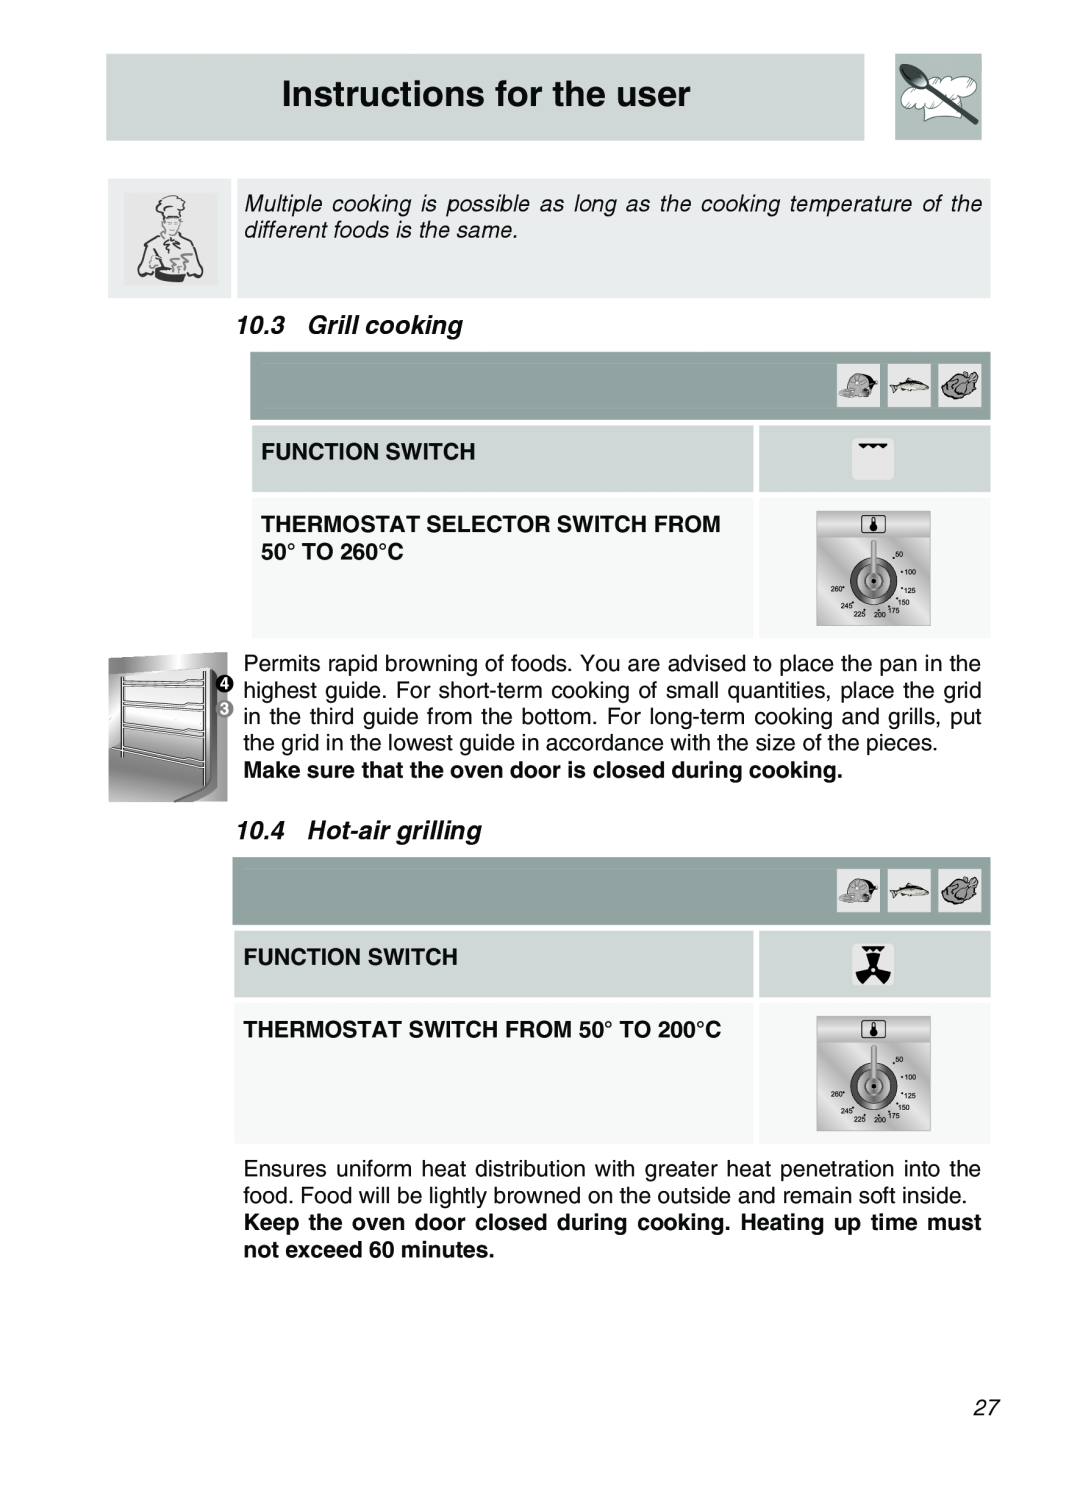 Smeg SA9066 Grill cooking, Hot-air grilling, Instructions for the user, FUNCTION SWITCH THERMOSTAT SWITCH FROM 50 TO 200C 